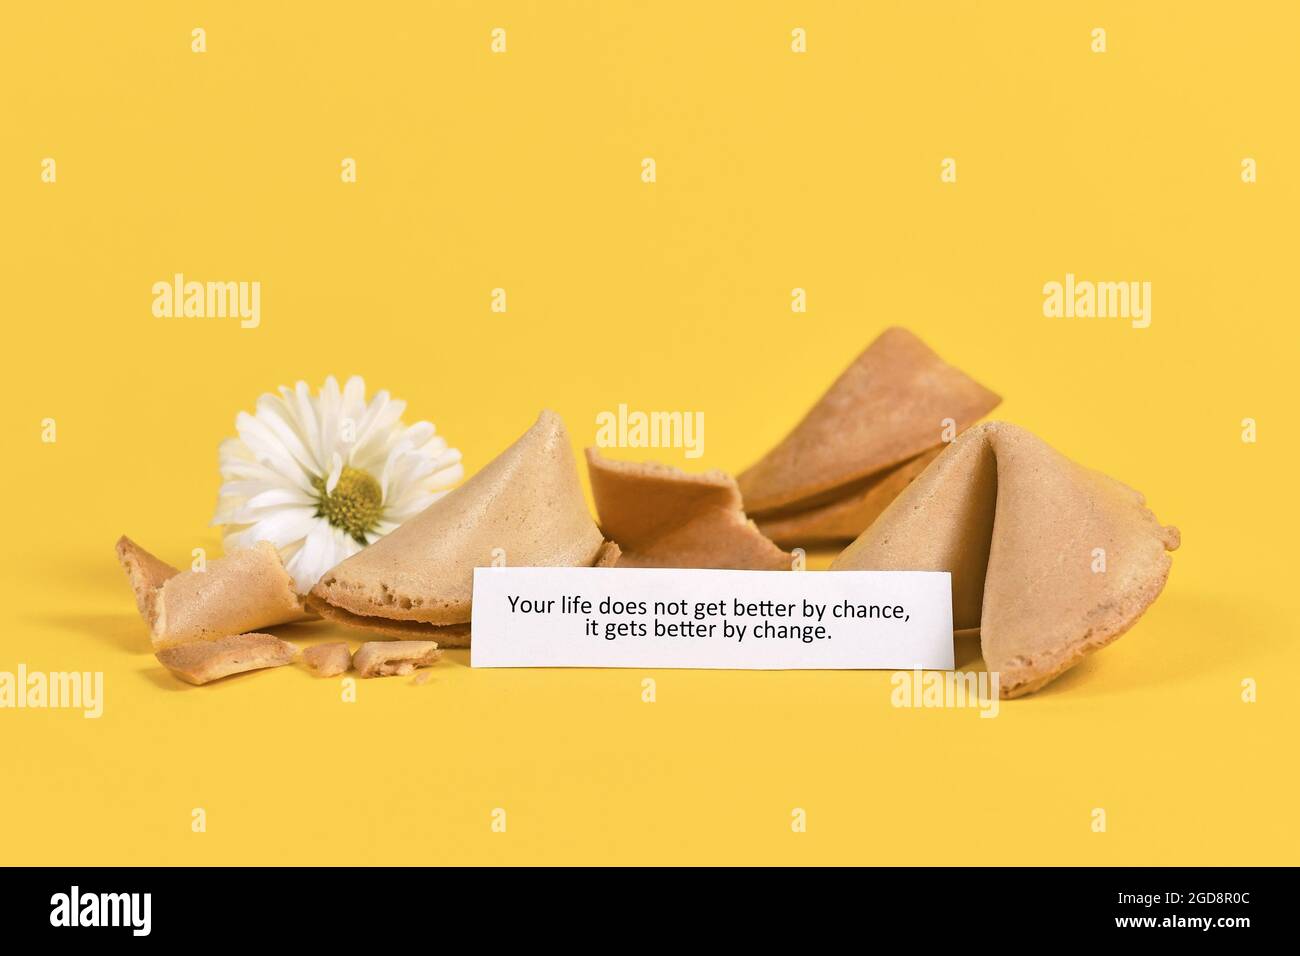 Note in fortune cookie saying 'Your life does not get better by chance, it gets better by change' on yellow background with flowers. Motivational conc Stock Photo